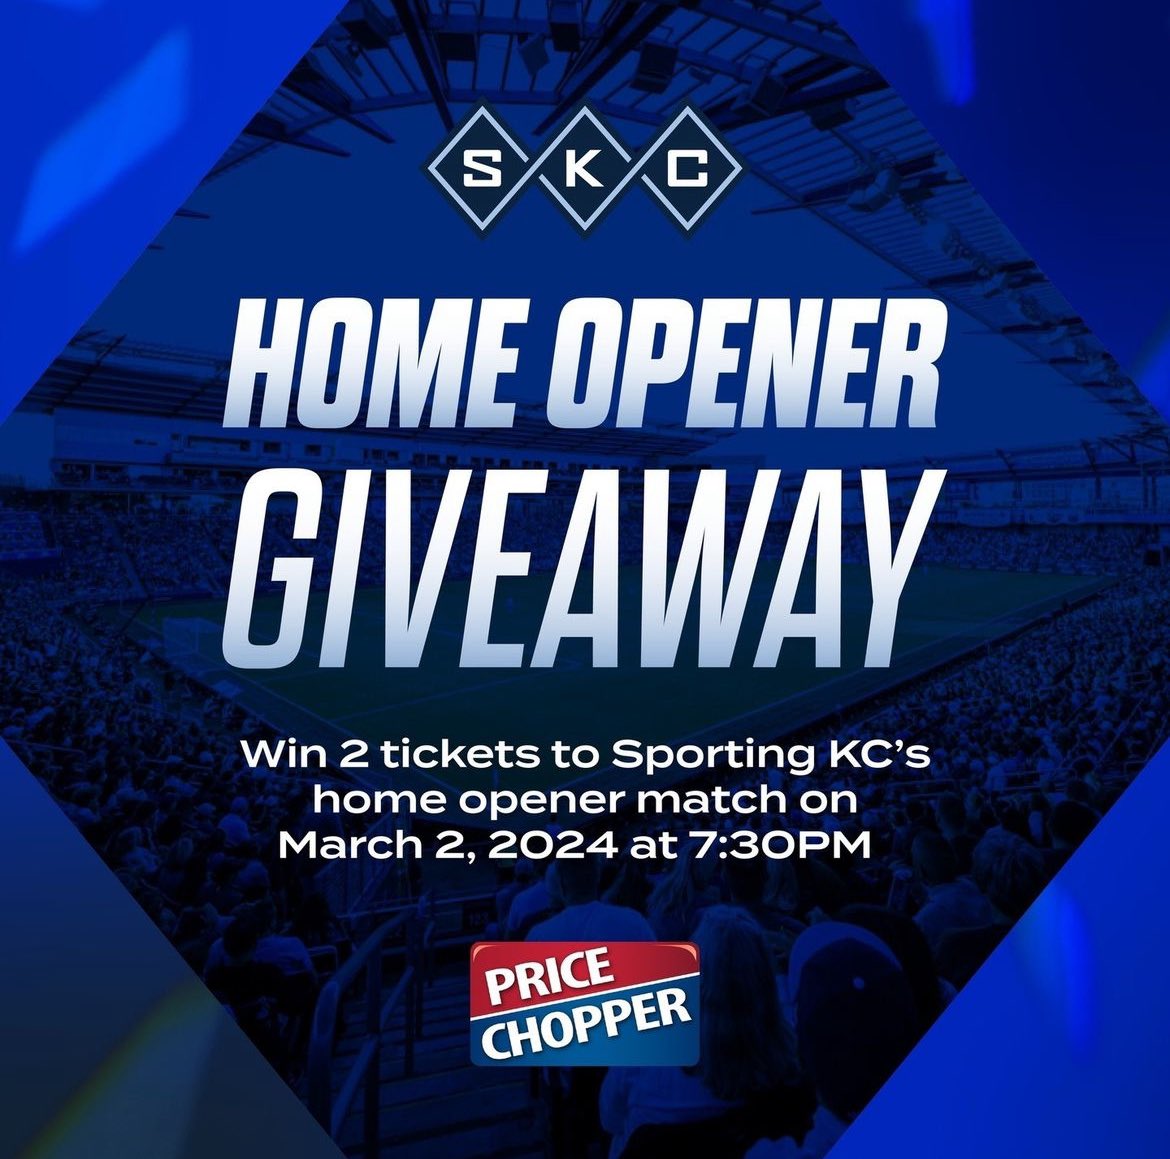 ⚽️ TWO FREE TIX ⚽️ up for grabs on the @‌mypricechopper Instagram to the @‌sportingkc battle against Philly at home on 3/2! Hit the link below for details! Don’t miss your chance to #paintthewall! Winner chosen 2/29. instagram.com/p/C3wDXKMyD9x/…